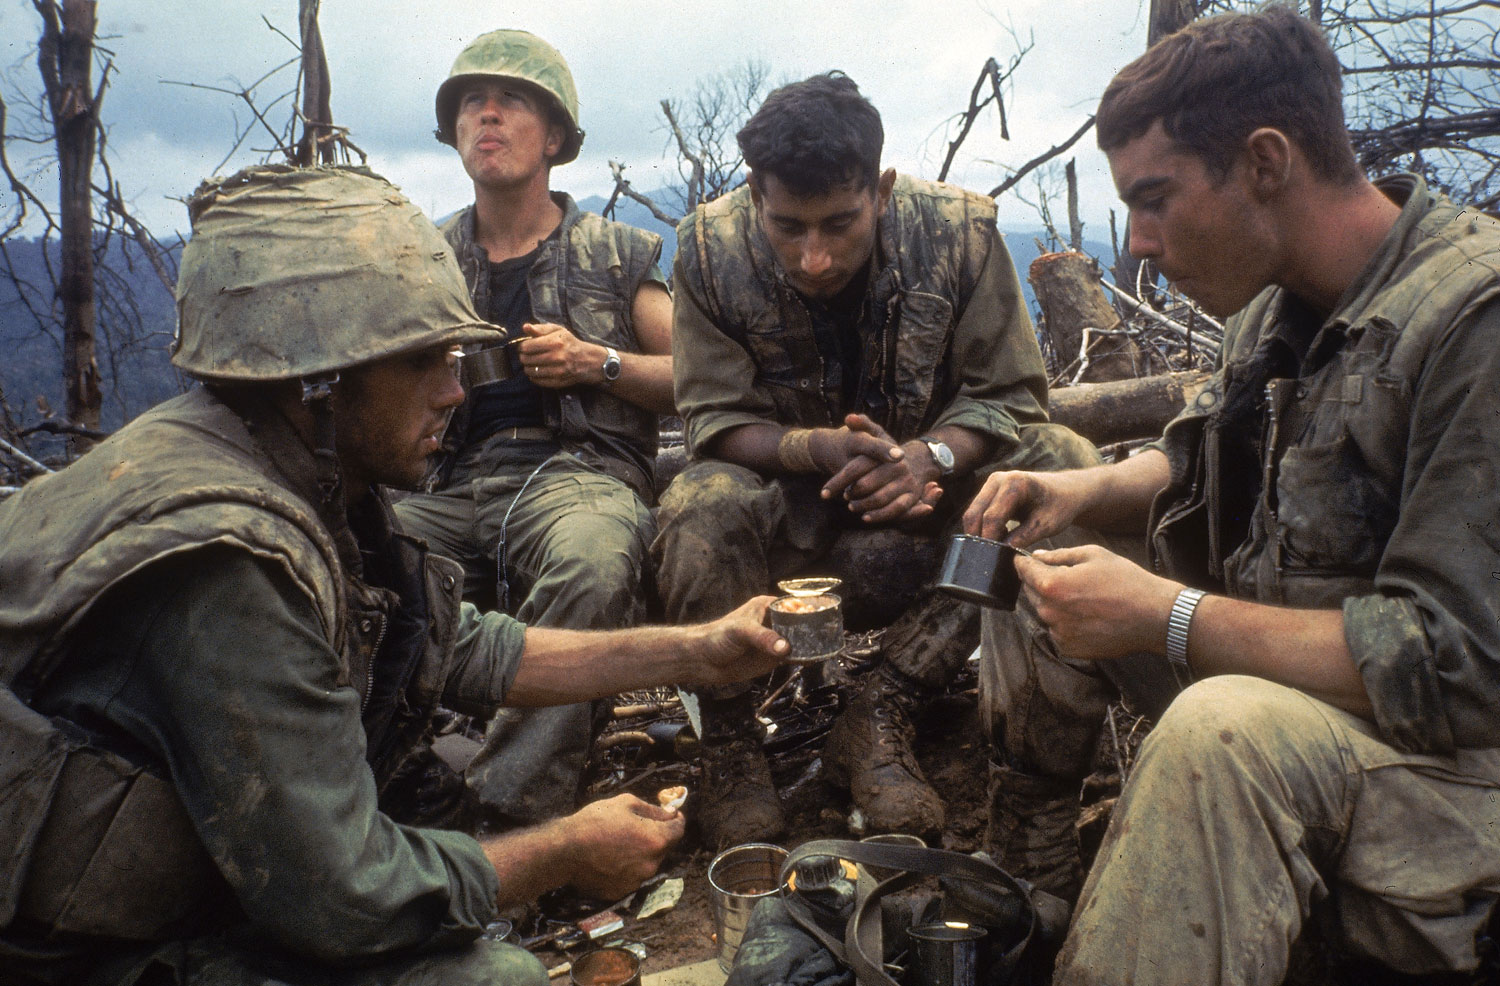 Not published in LIFE. American Marines eat rations during a lull in the fighting near the DMZ during the Vietnam War, October 1966.